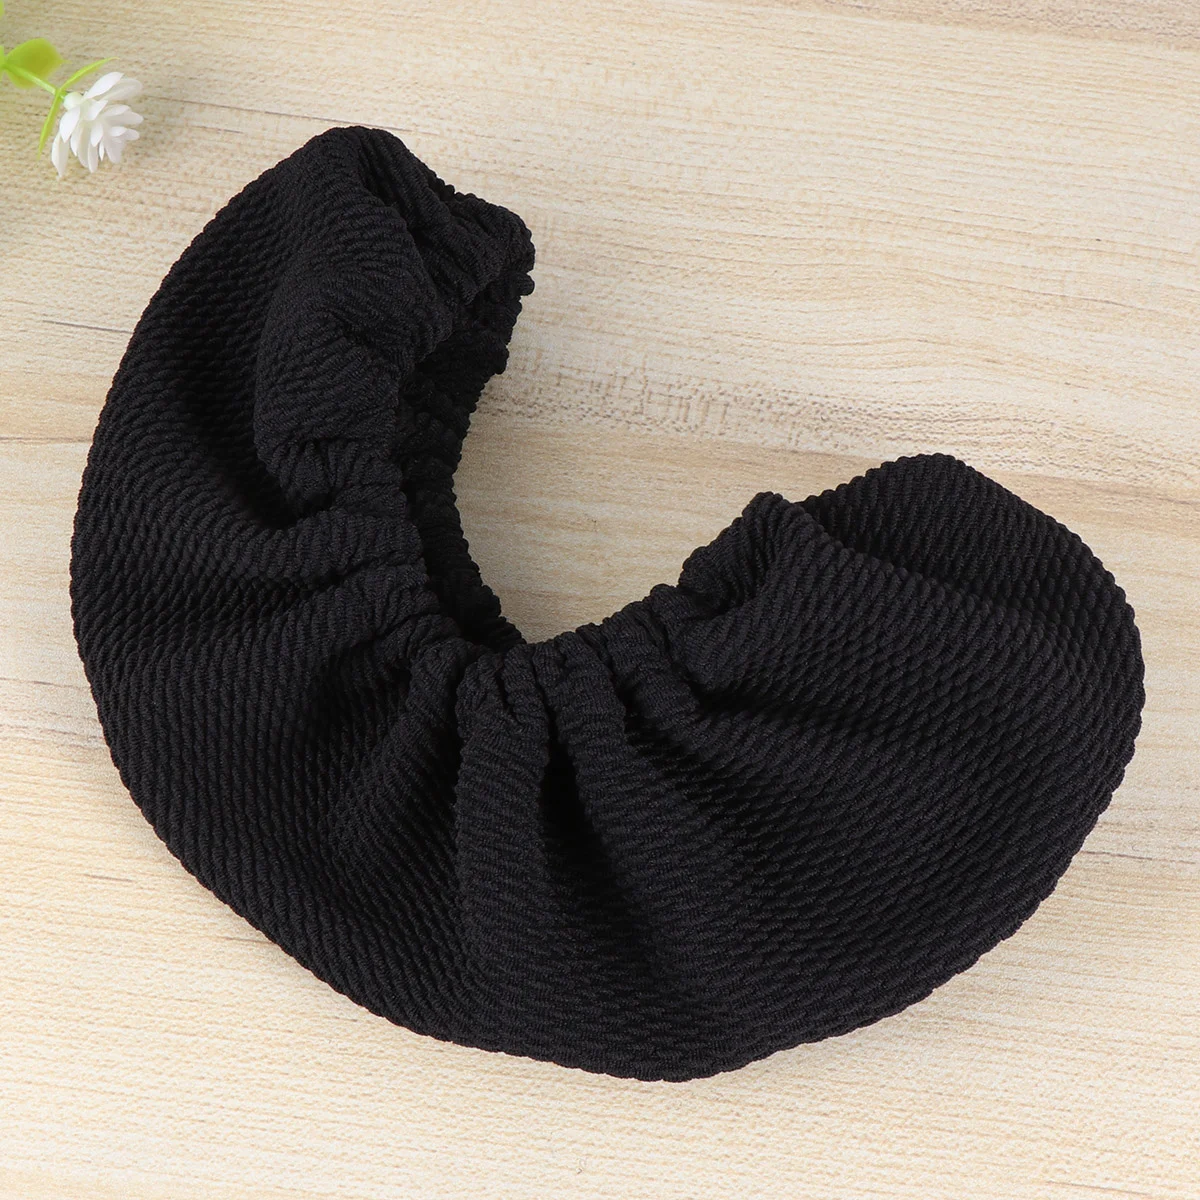 

Chair Arm Office Armrest Cover Covers Rest Pad Pads Elbow Gaming Computer Supplies Memory Wheelchair Cushion Slipcovers